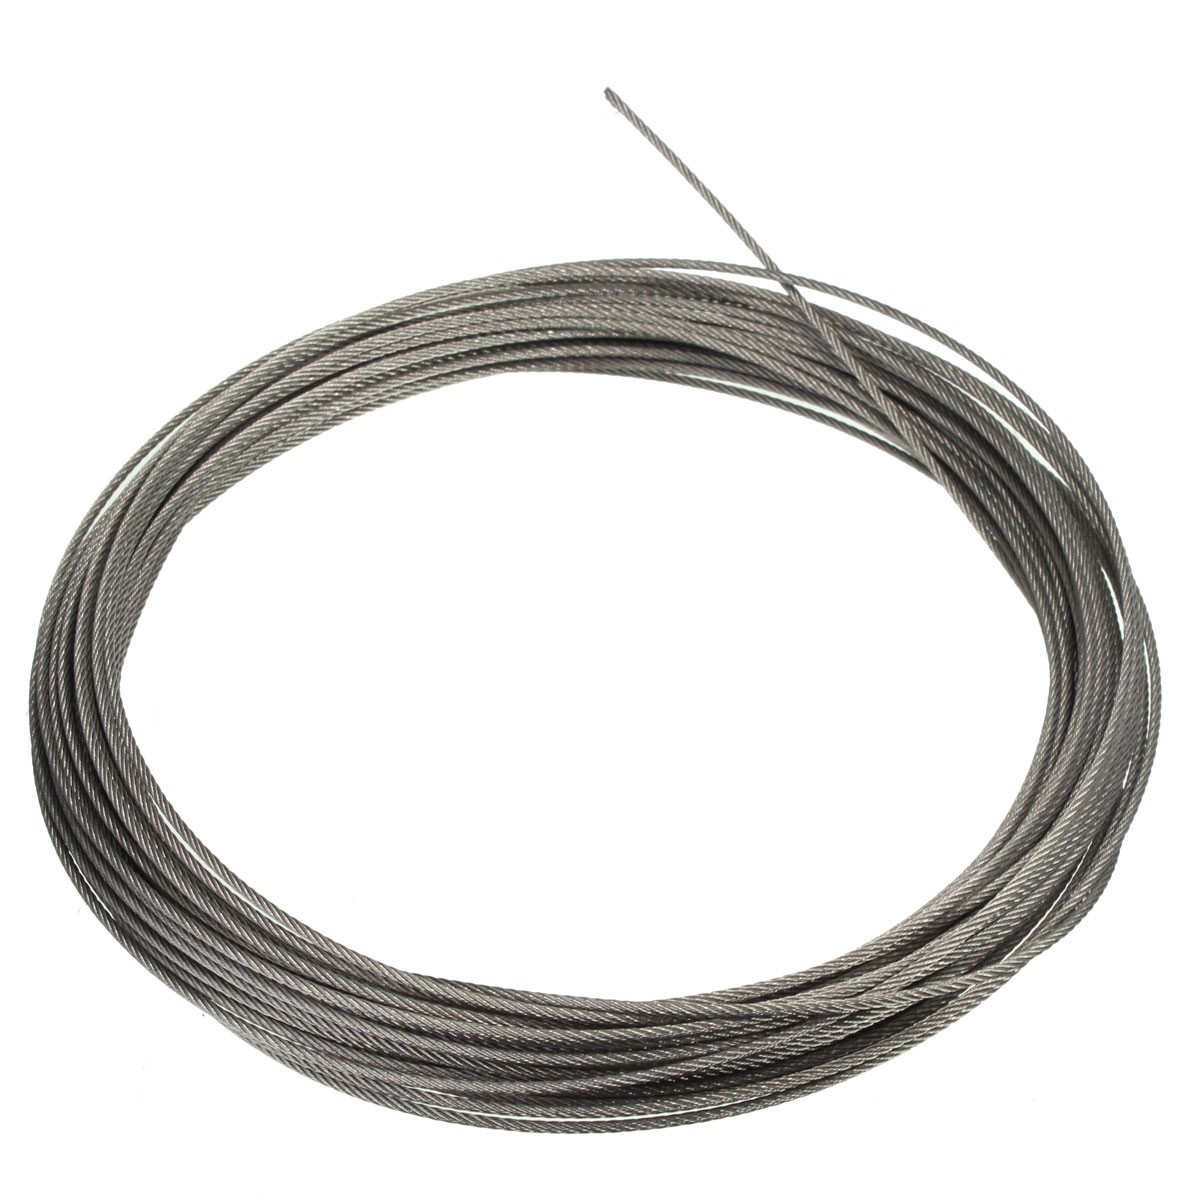 15M-316-Stainless-Steel-Clothes-Cable-Line-Wire-Rope-1035887-5